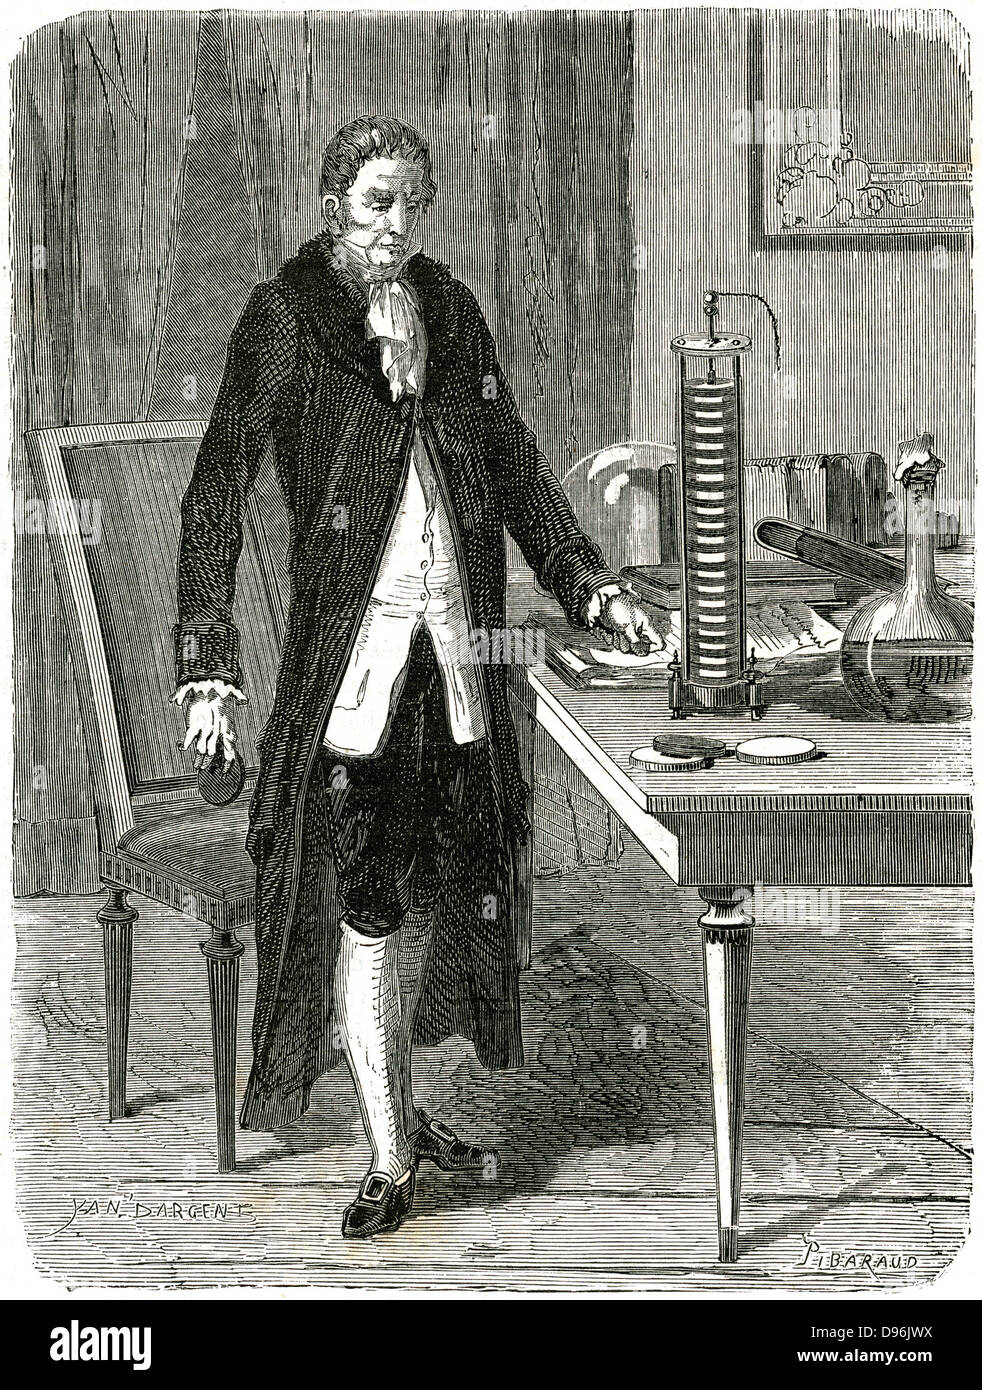 Alessandro Volta (1745-1827) Italian physicist, demonstrating his electric pile (battery). Wood engraving, Paris, c1870. Stock Photo